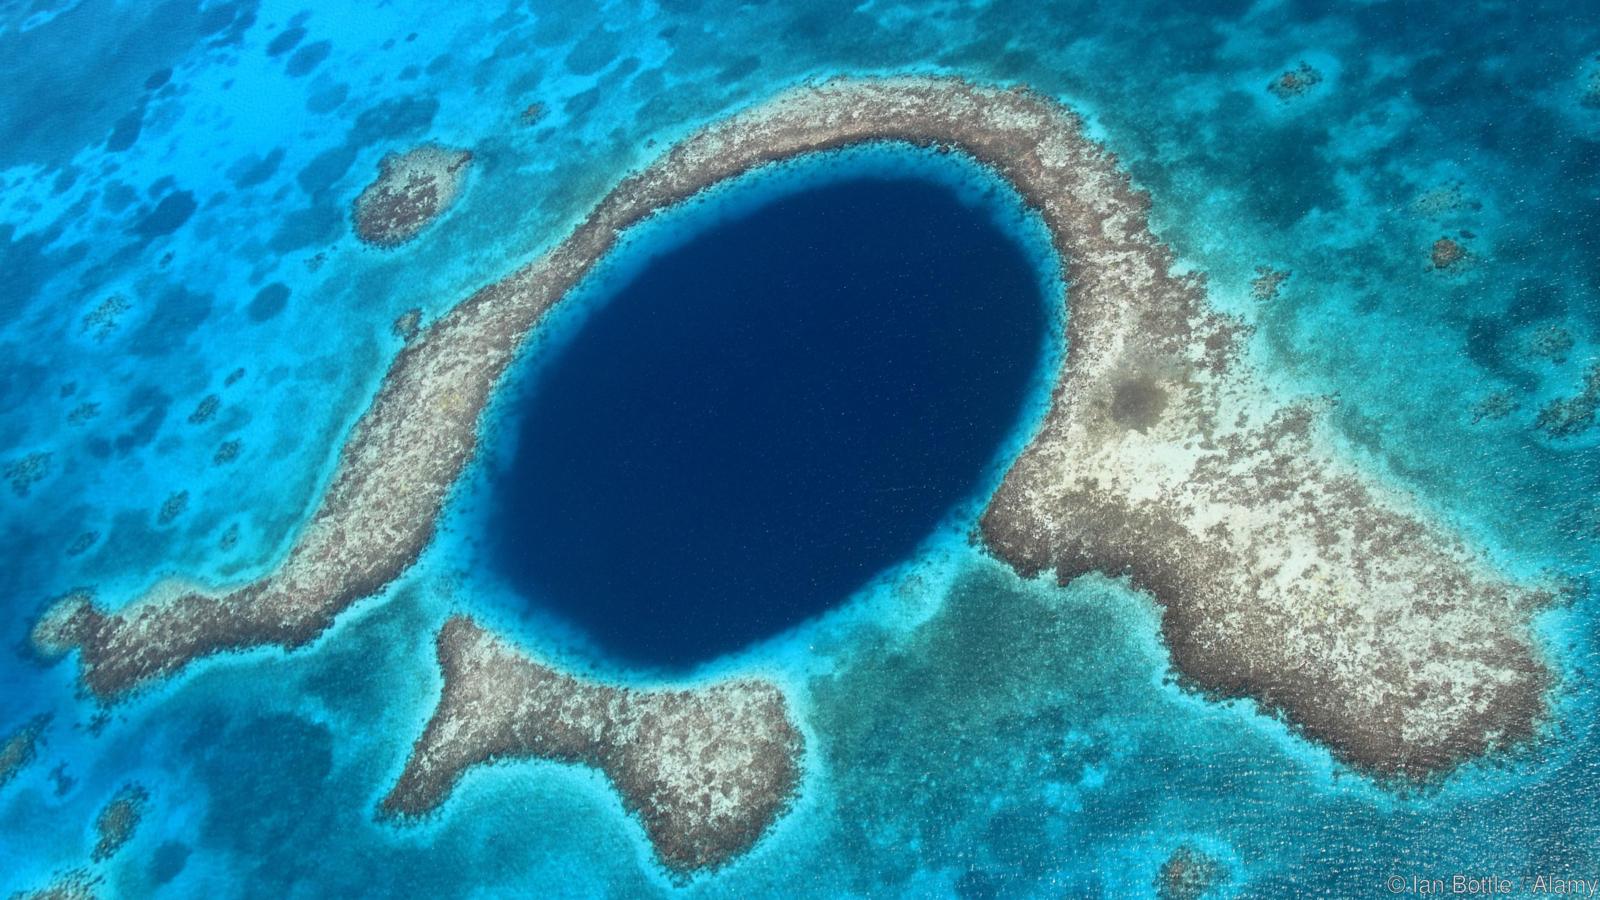 CFHBB5 Great Blue Hole, a collapsed underwater cave system, Lighthouse Reef, Belize Barrier Reef, Belize, Caribbean, Central America